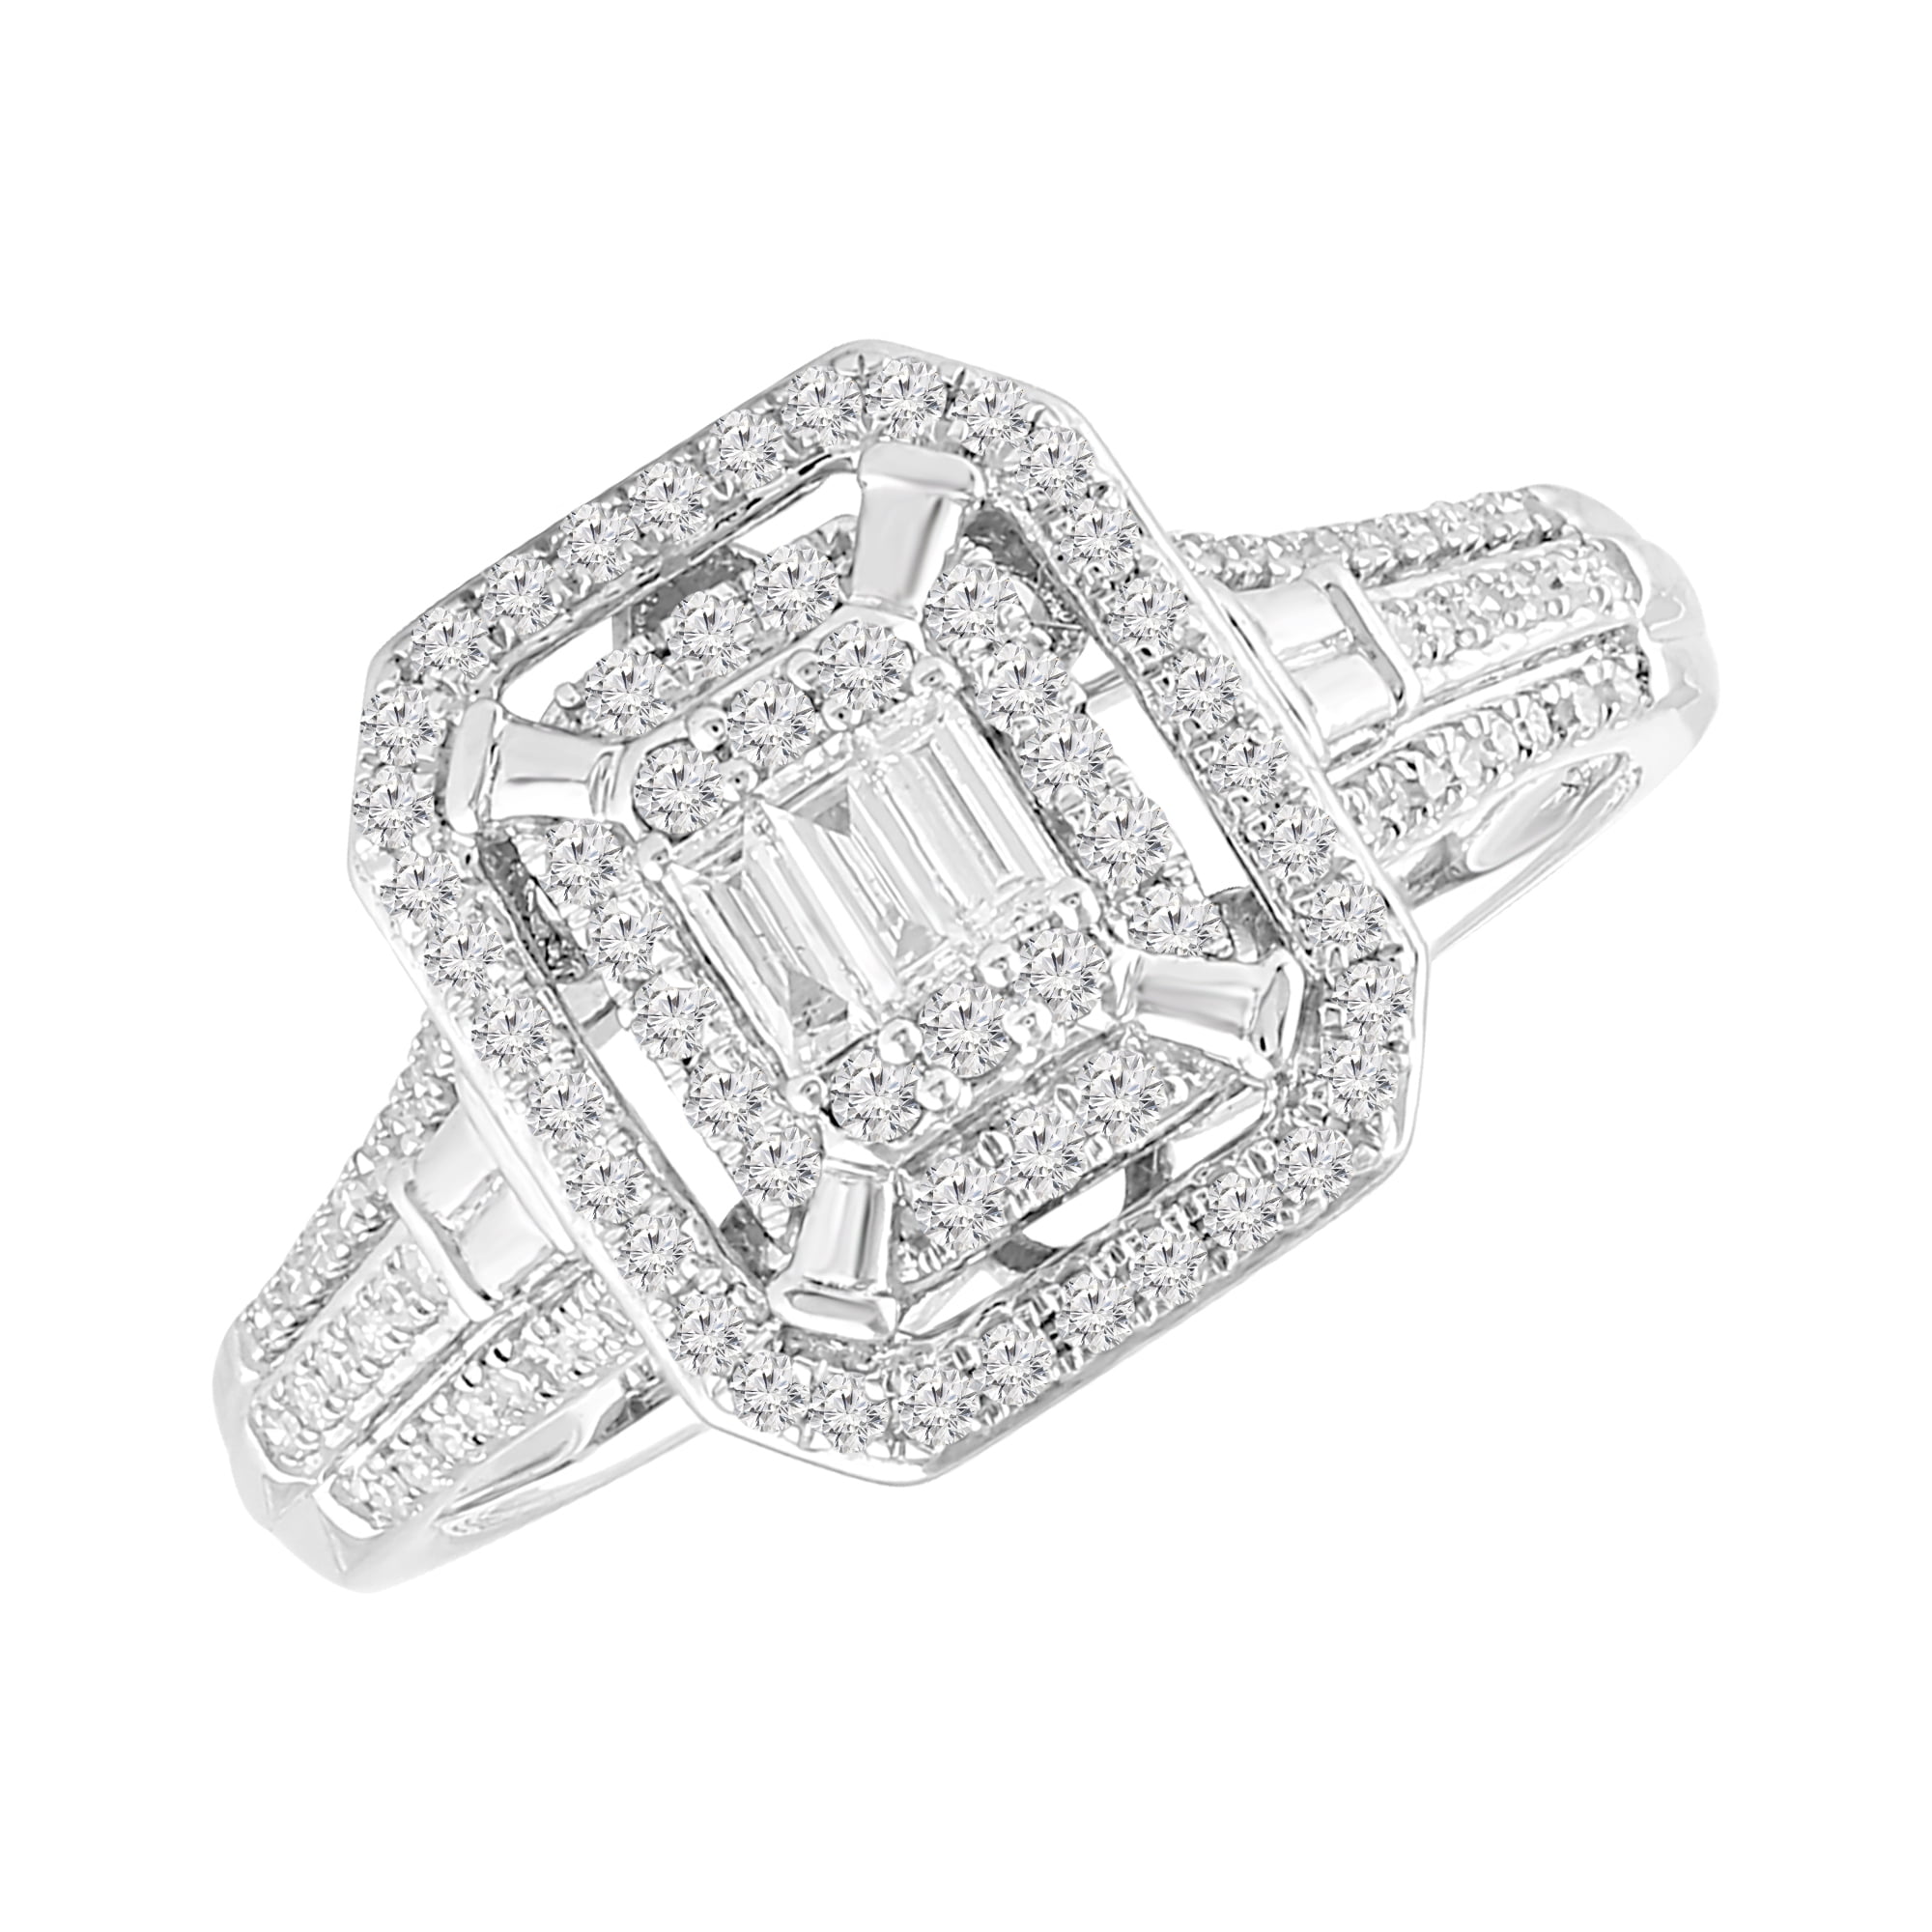 Details about   1.85 ct Emerald Cut Clear CZ 18k Yellow Gold Halo Wedding Promise Bridal Ring 